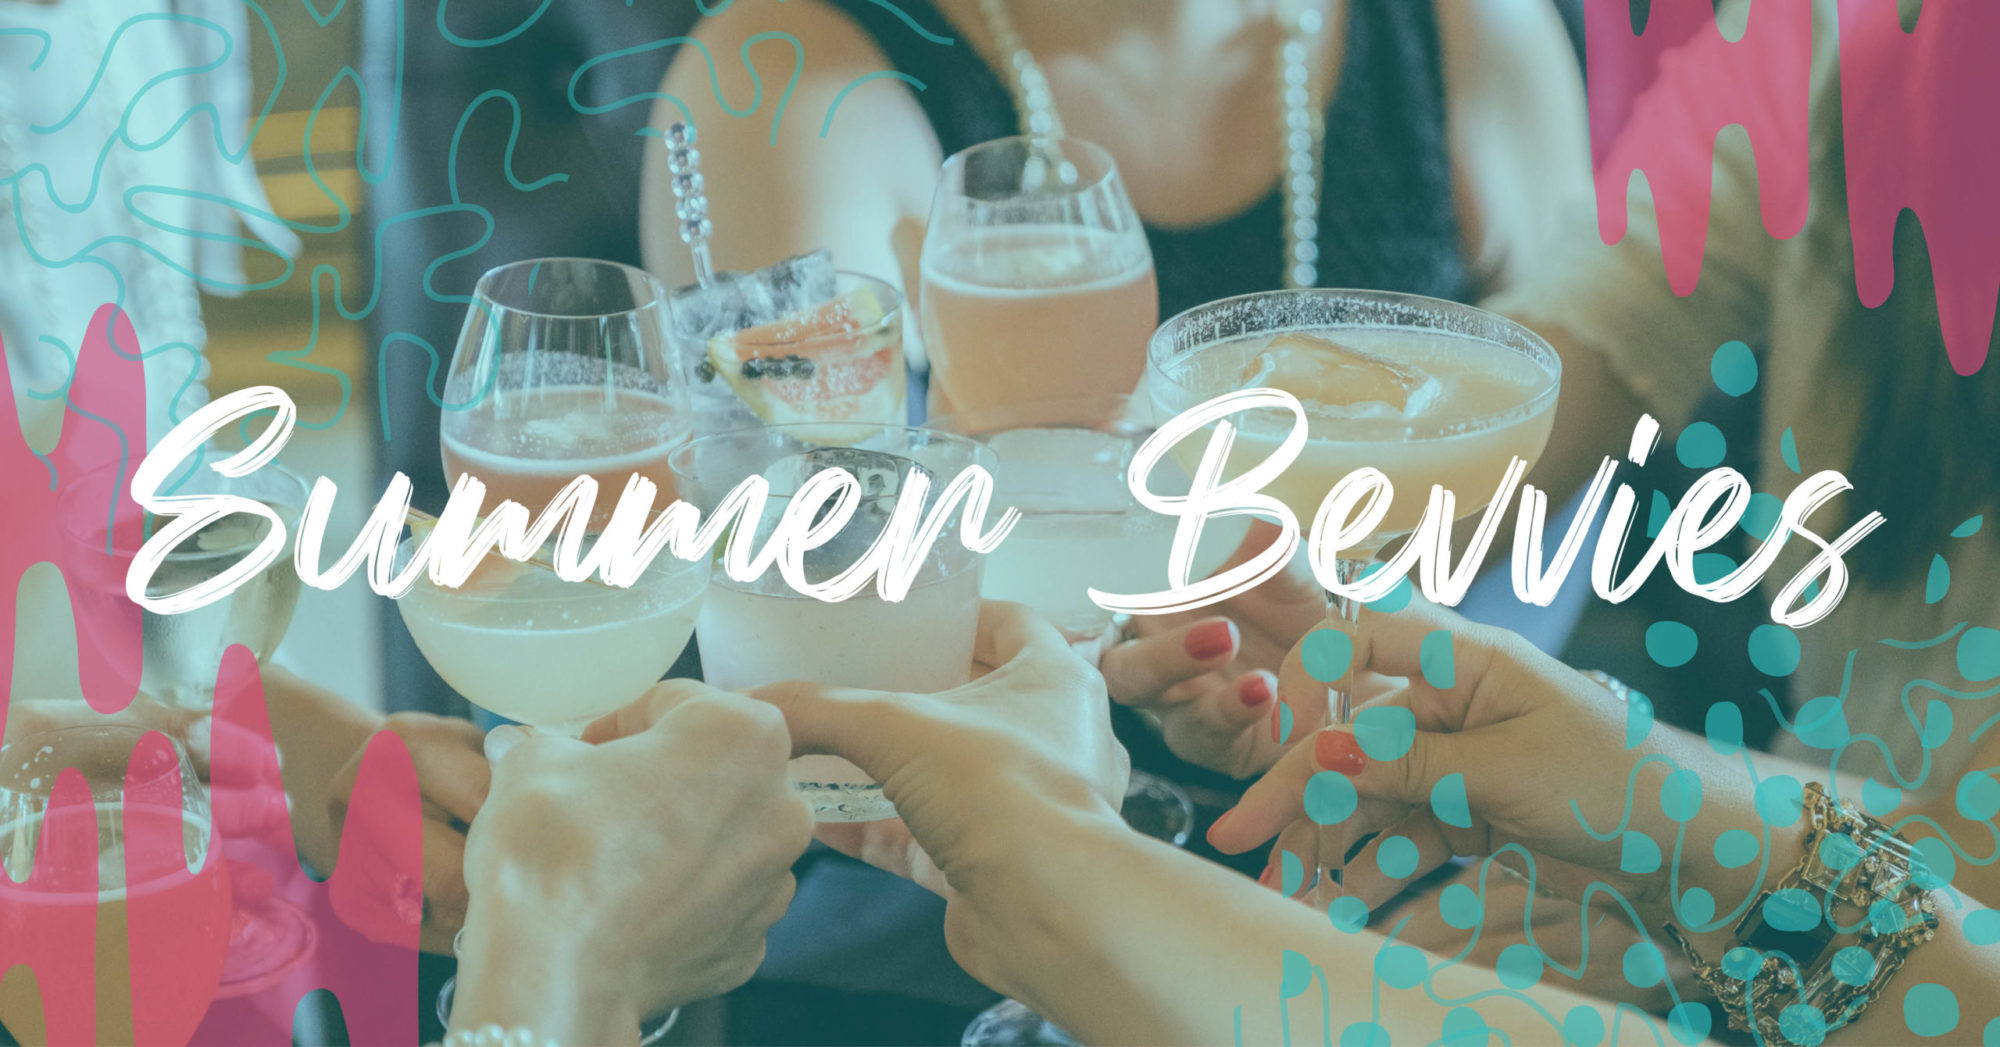 Summer Bevvies text over image of a team cheers